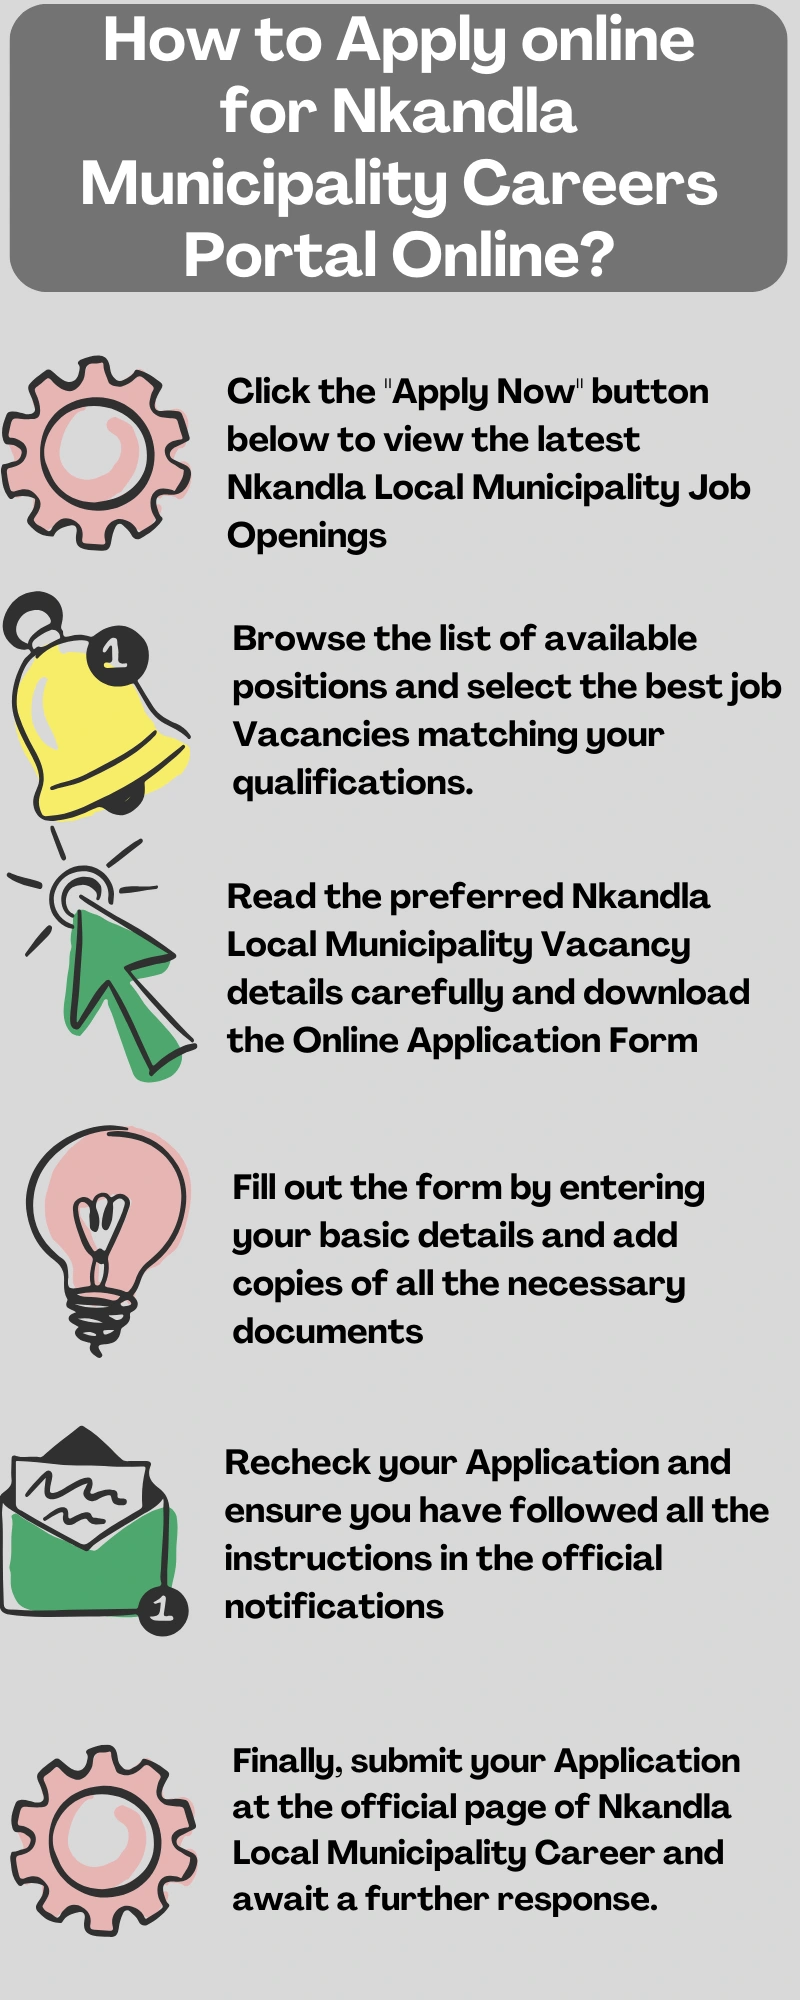 How to Apply online for Nkandla Municipality Careers Portal Online?